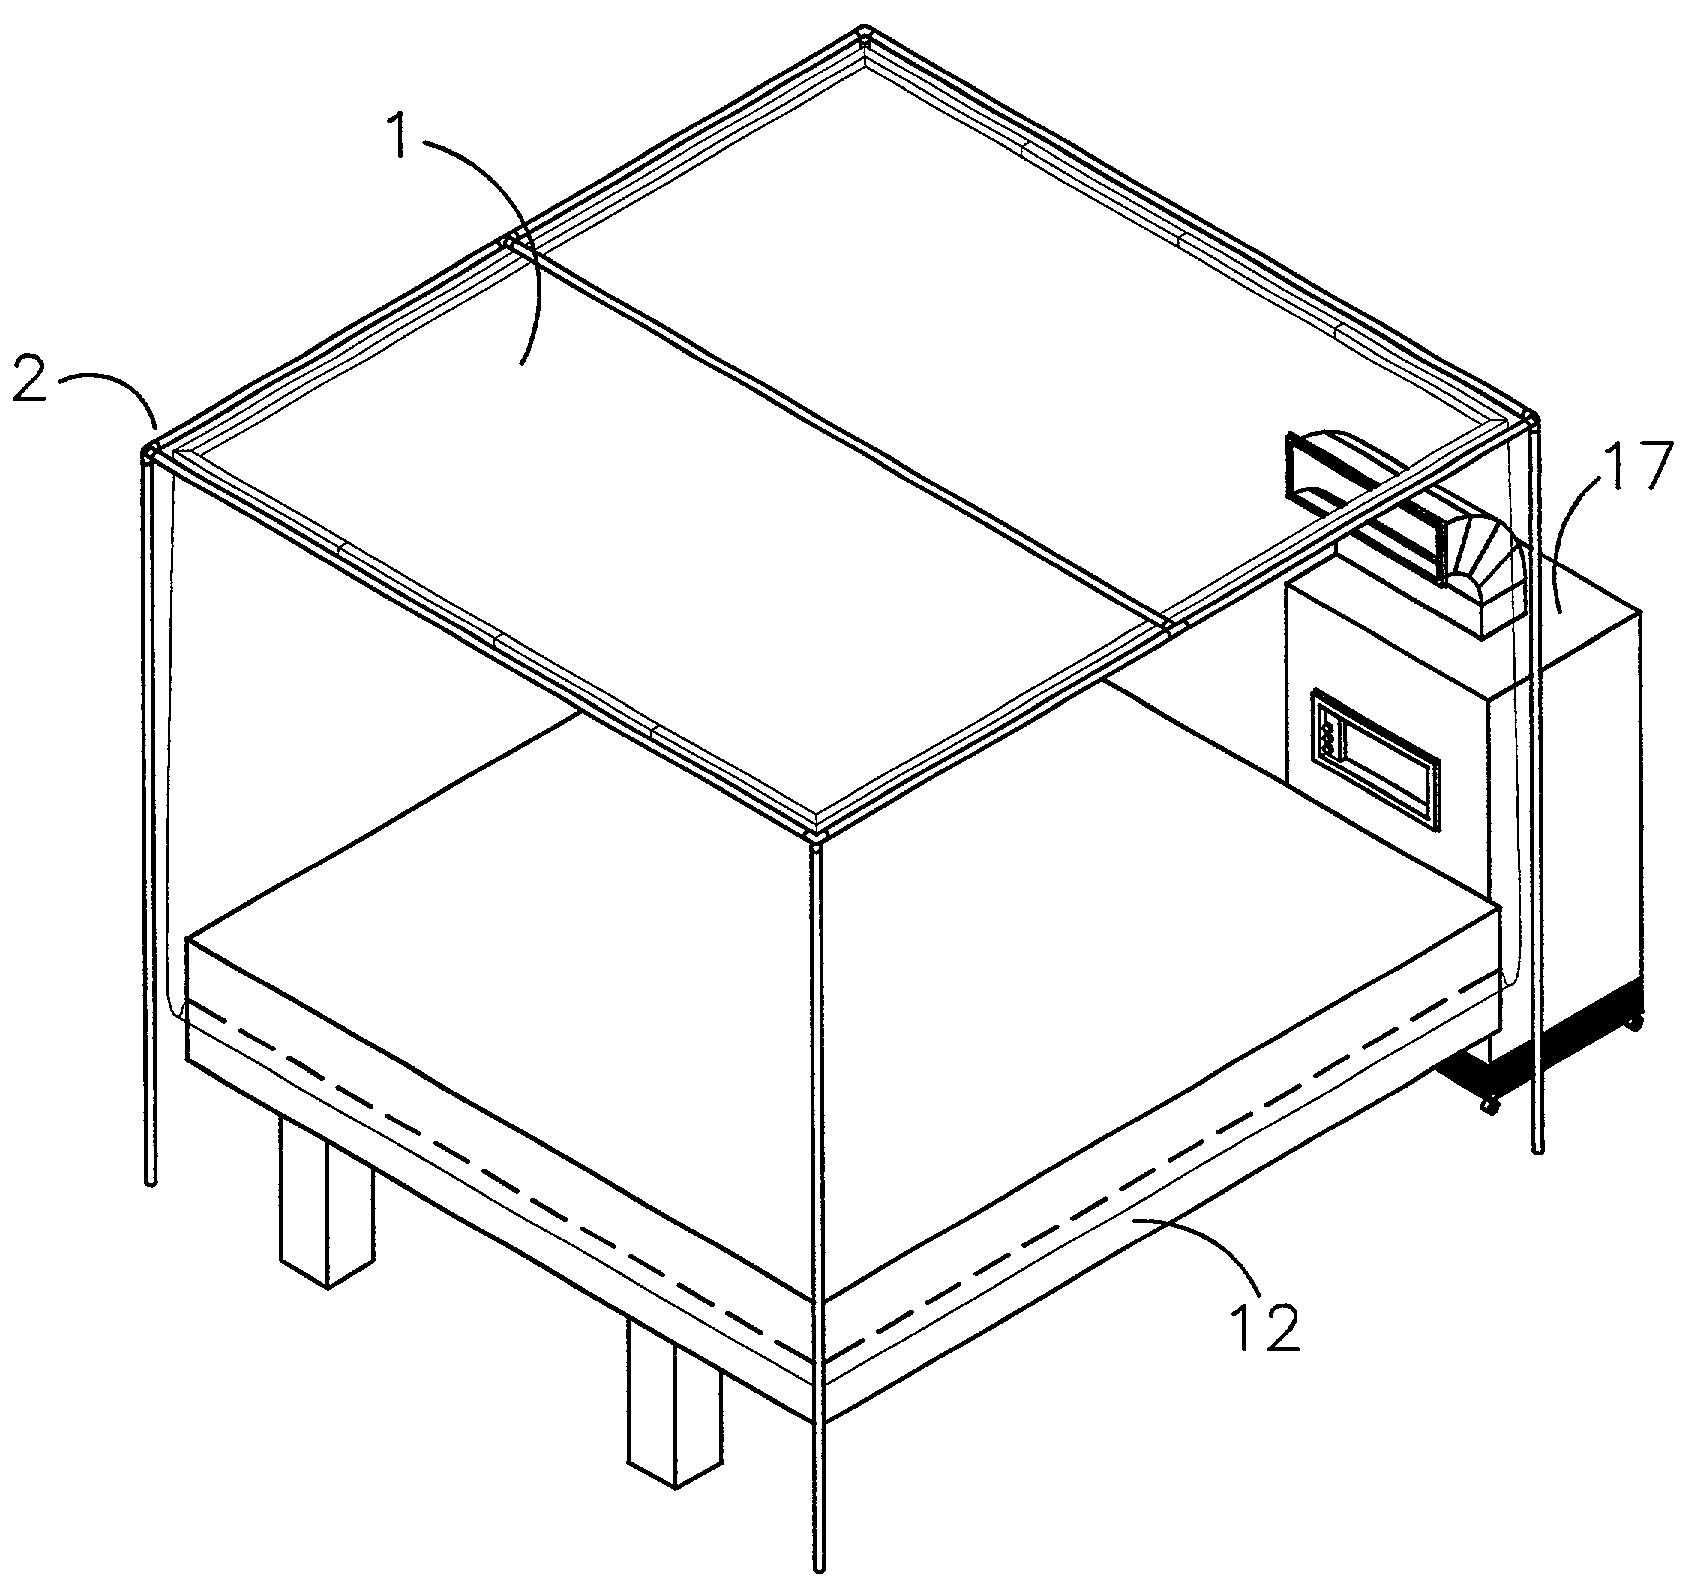 Self-contained air-conditioned enclosure